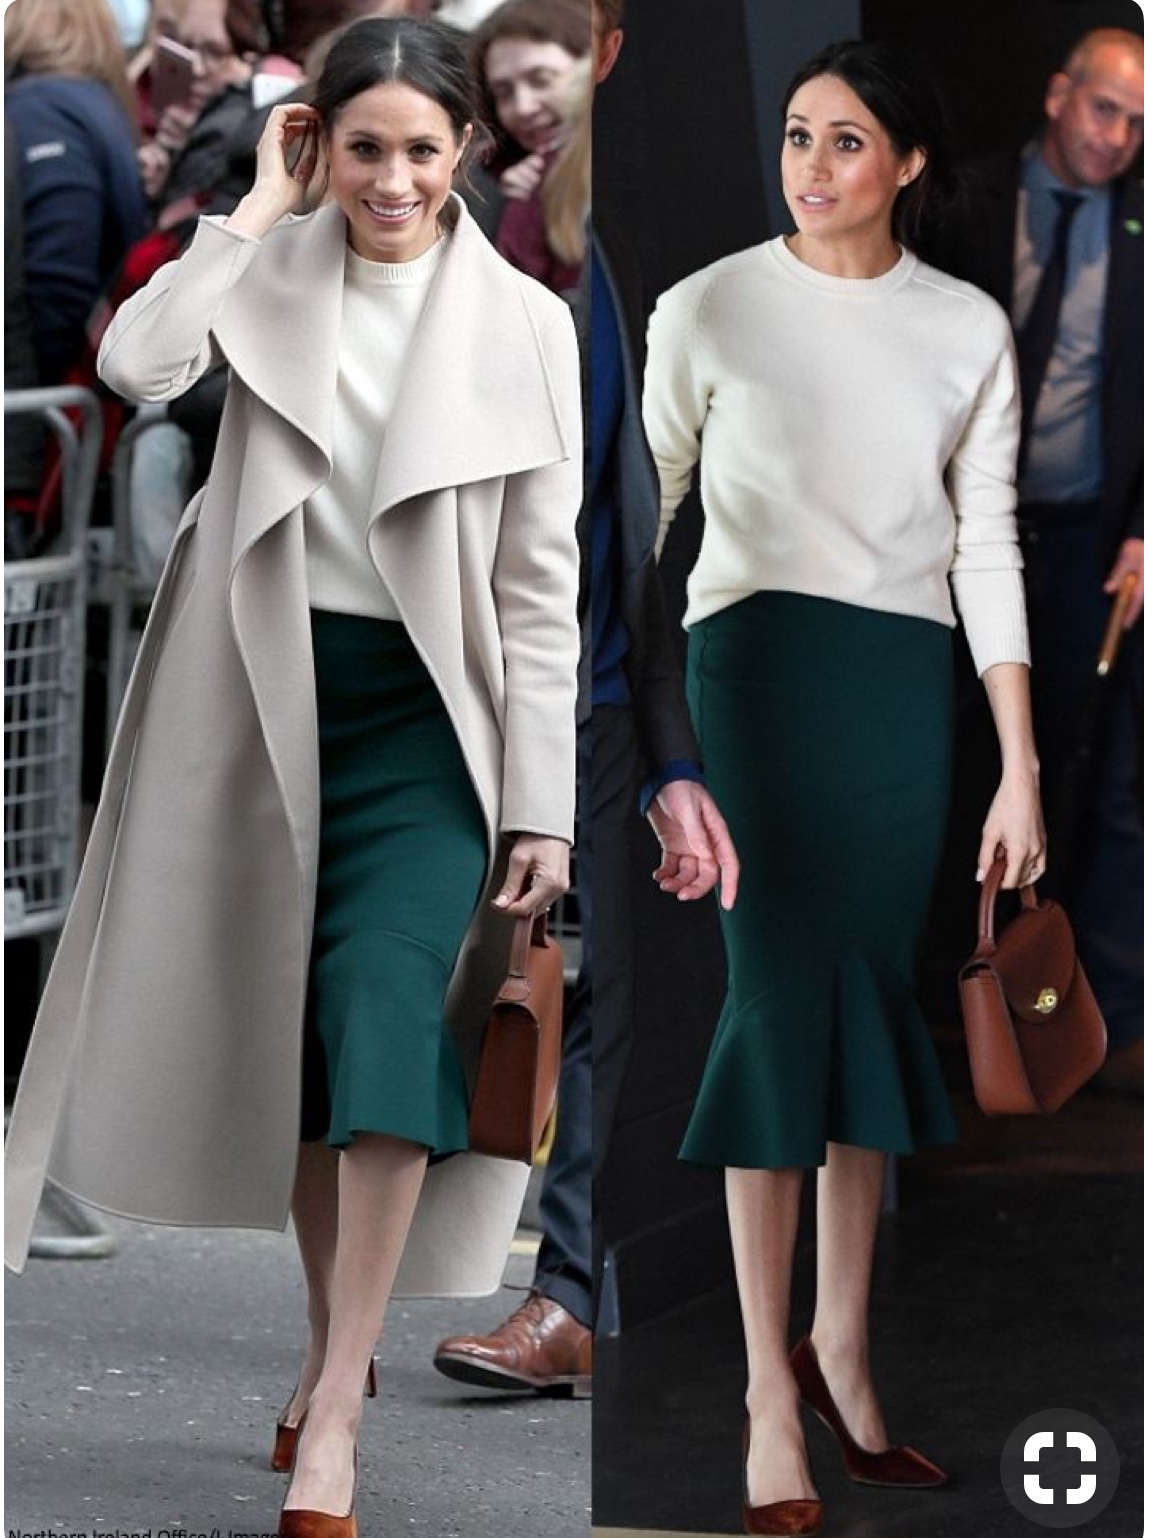 The Meghan Markle Style Files – Meet the Shaneyfelts